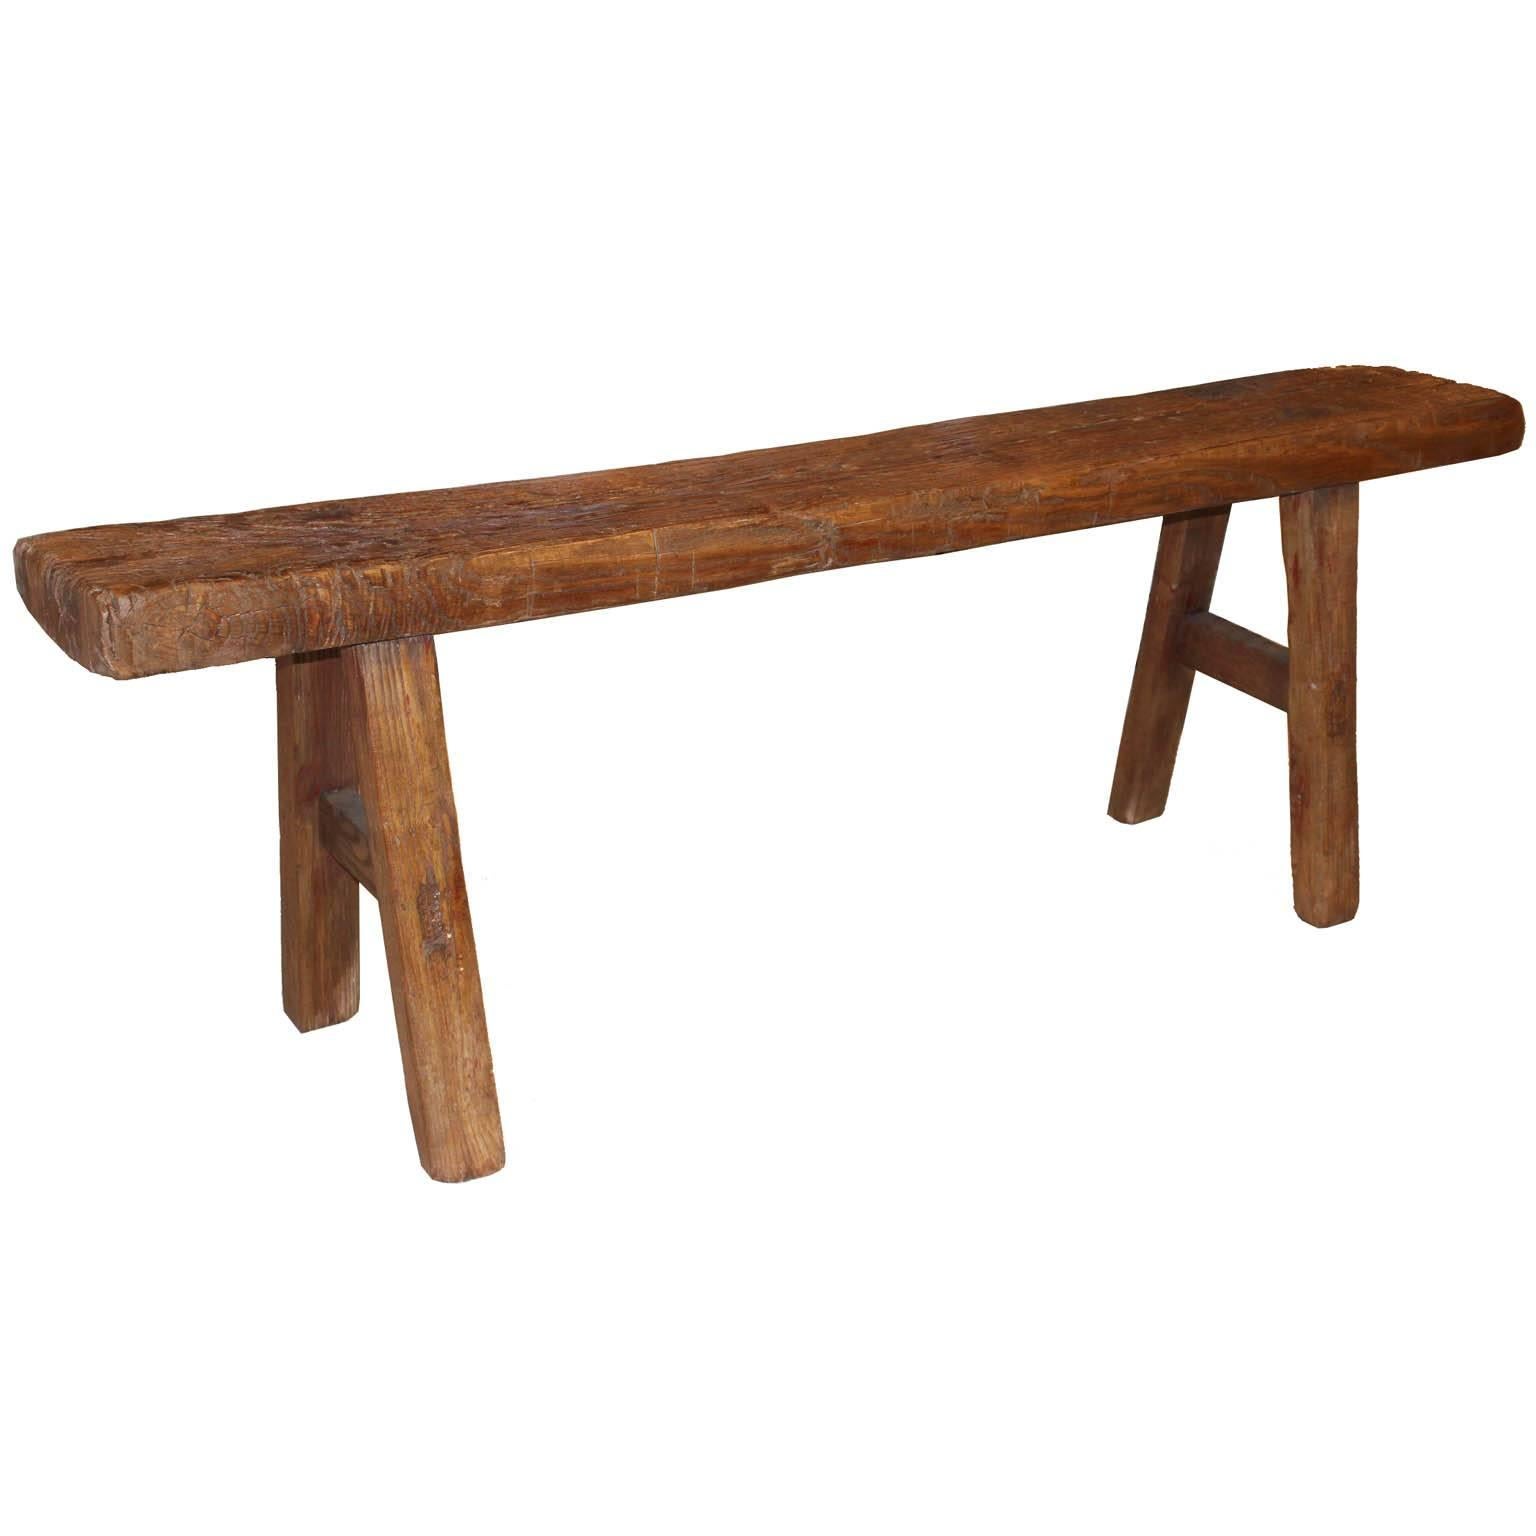 Elmwood bench with side support bars. Originally used to practice martial arts. Measures: Seat depth 9